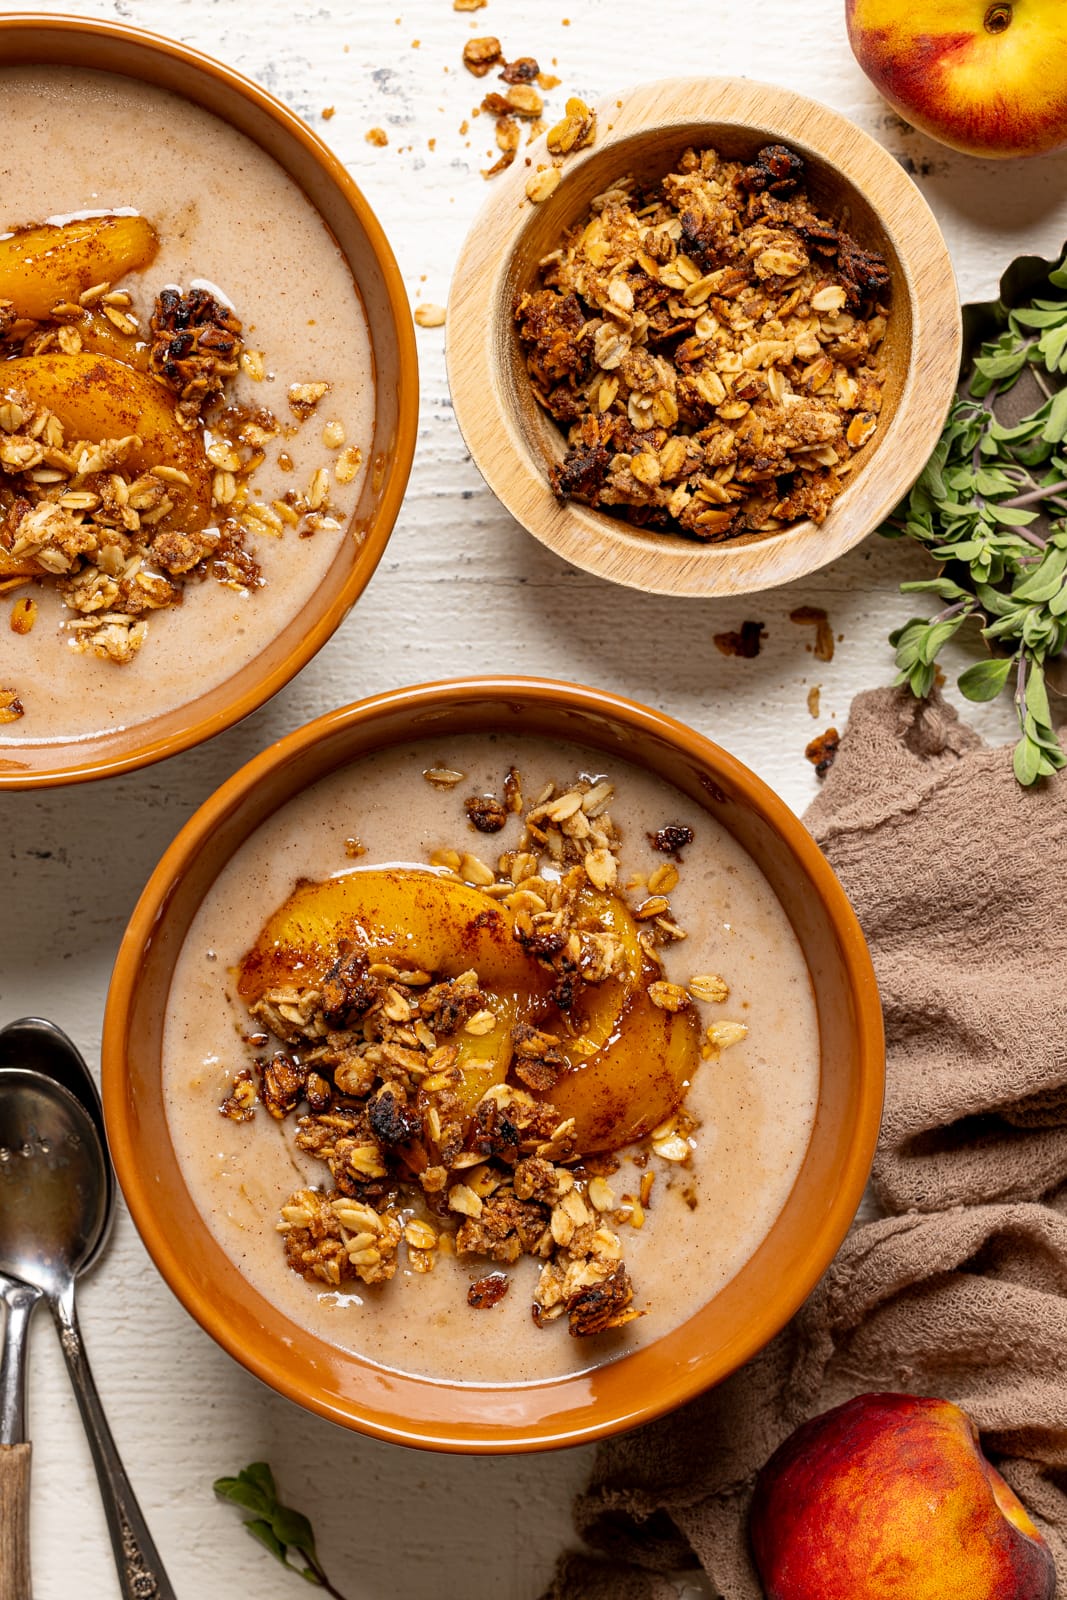 Bowl of oatmeal porridge with two spoons, peaches, and granola.